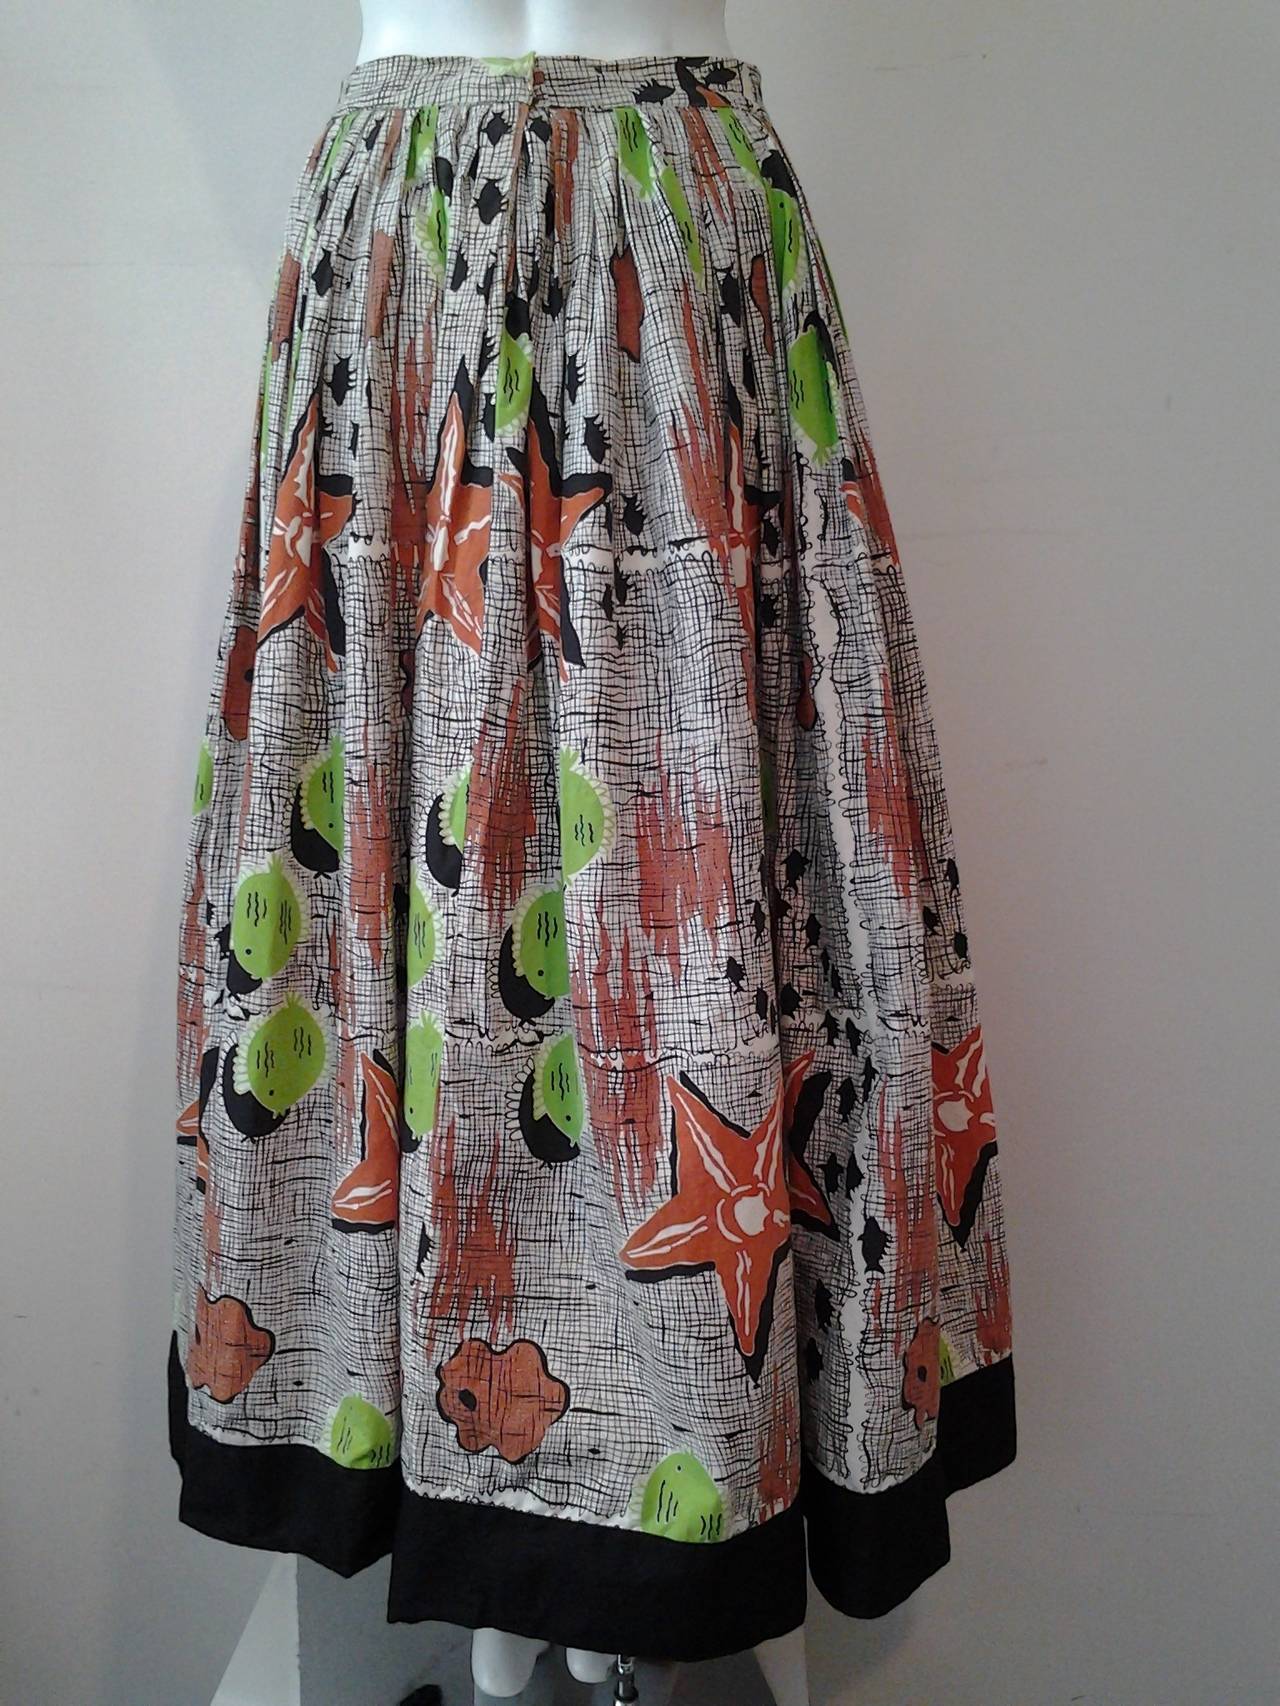 A wonderful 1940s brown, black and lime green seashell print pattered full skirt with decorative buttons at front, and wide black banded bottom.